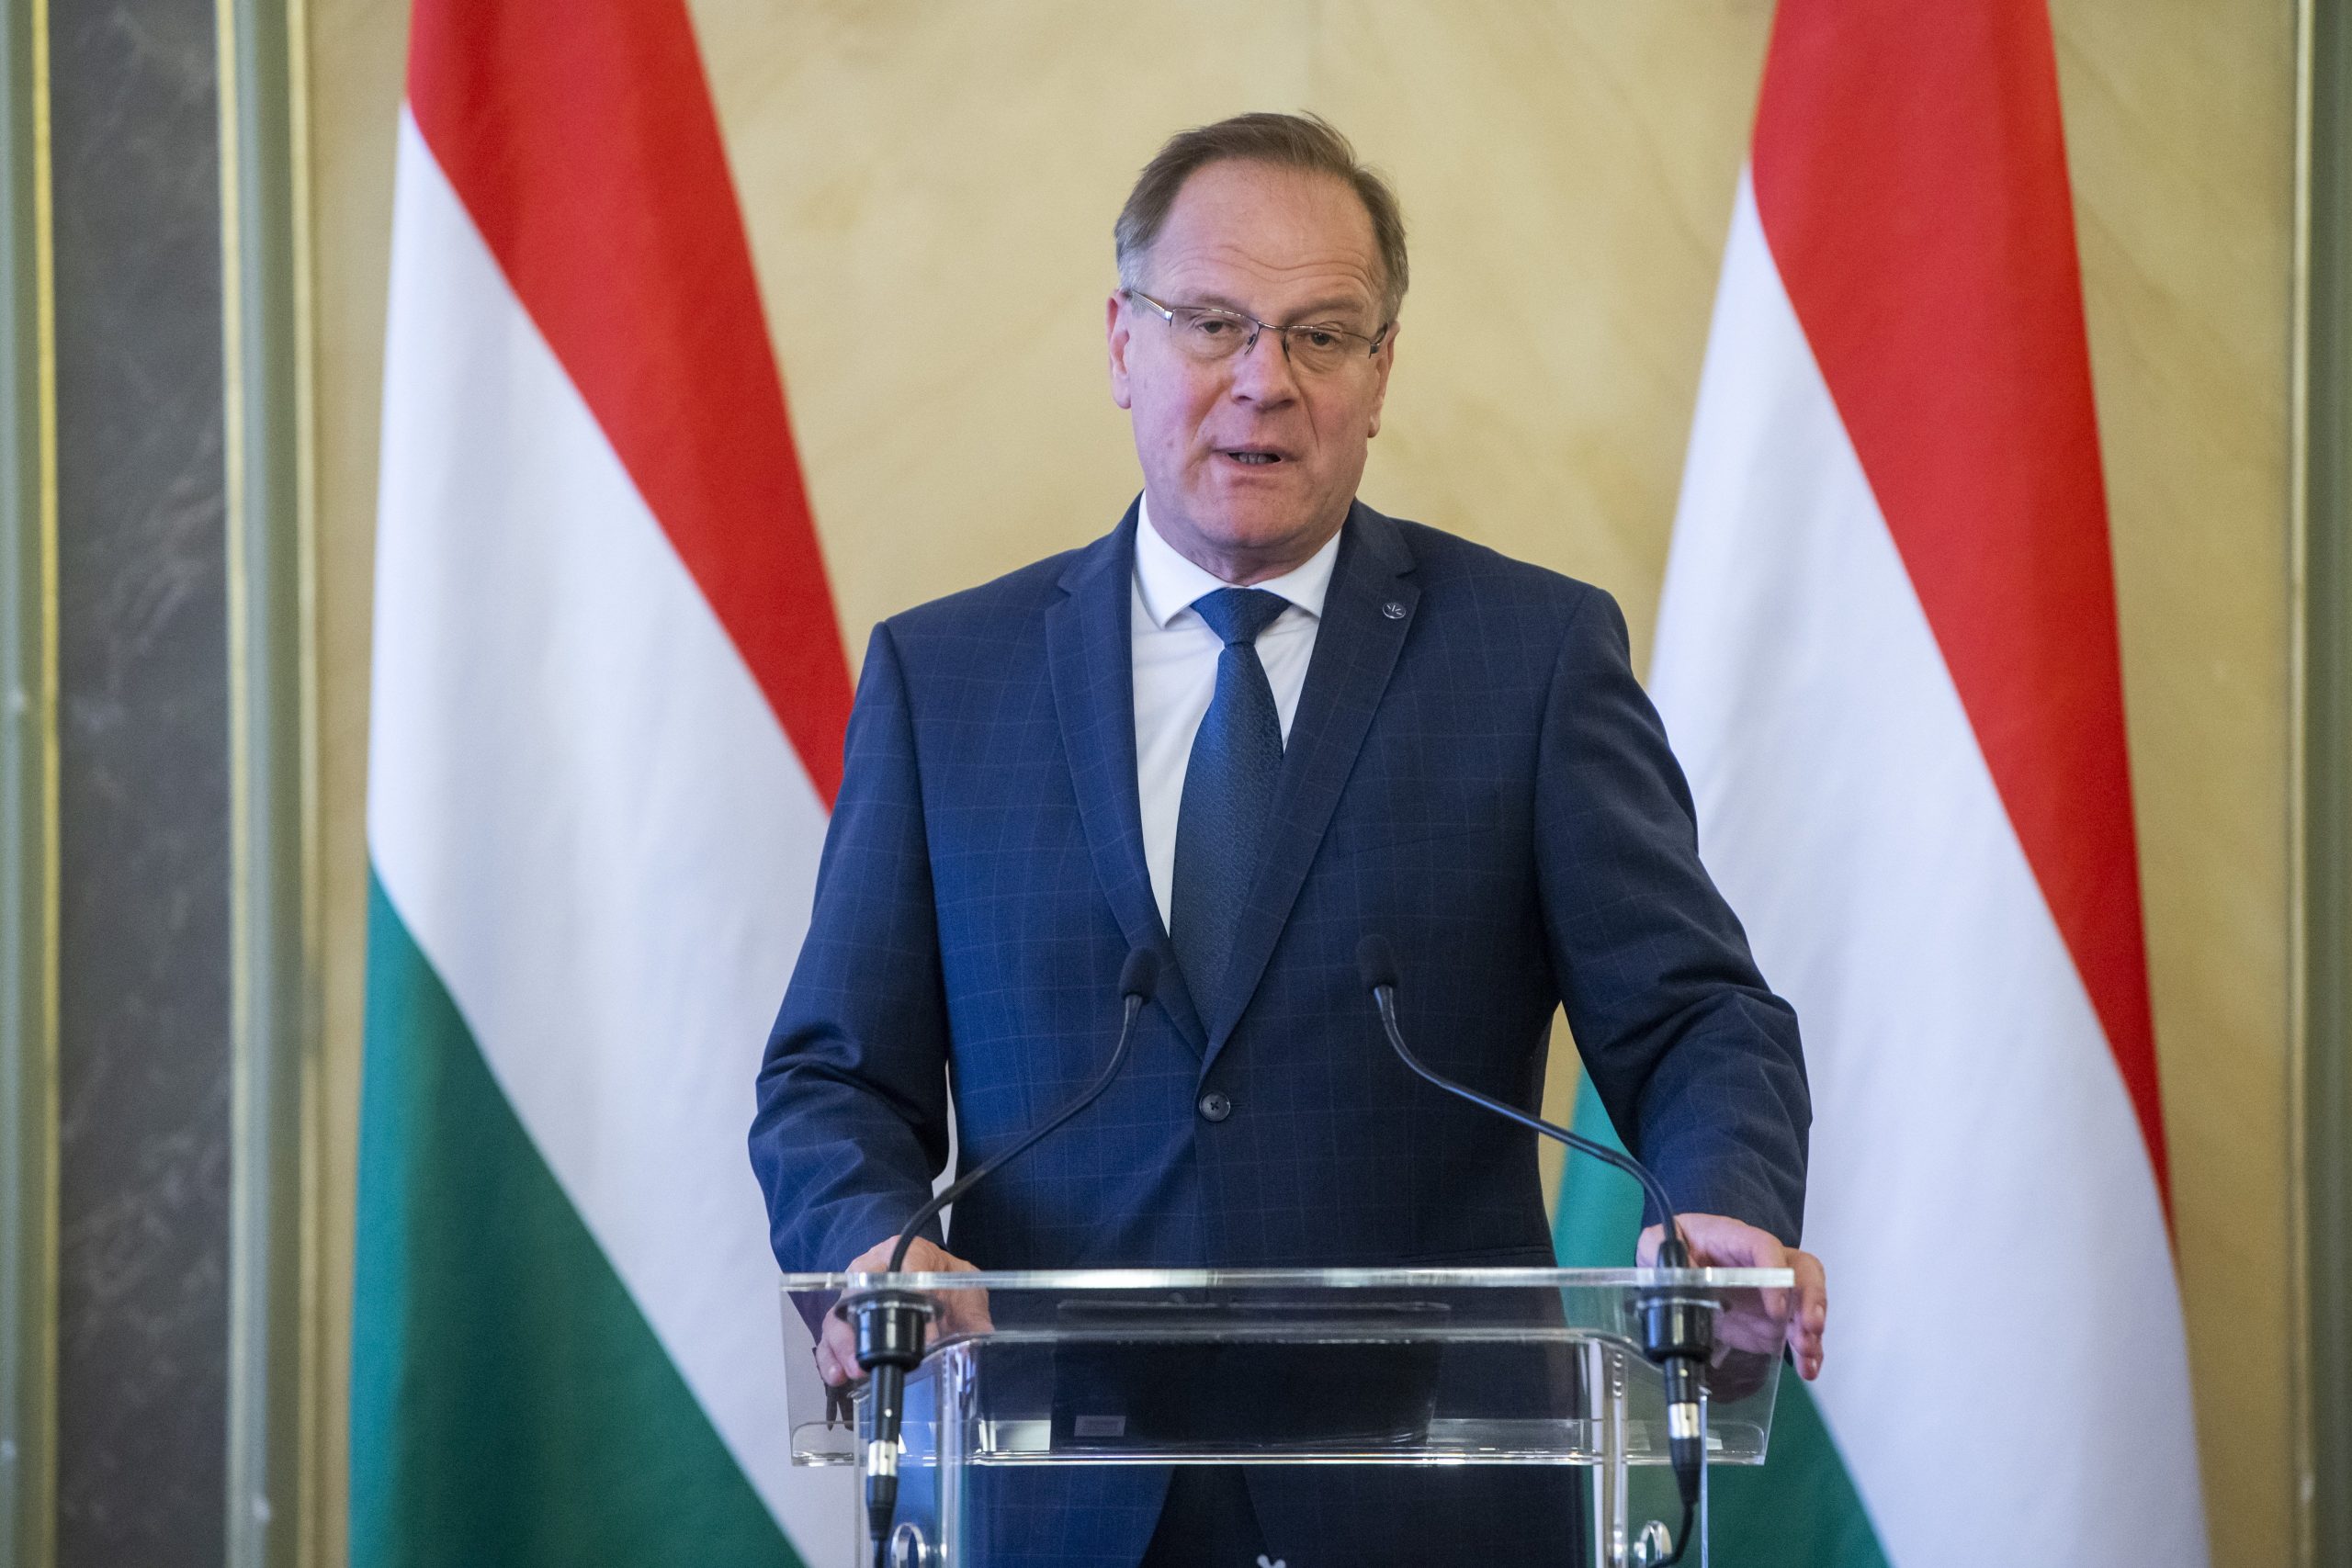 Minister Navracsics: Hungary Ready to Make Compromises with Brussels to Unblock Recovery Funds